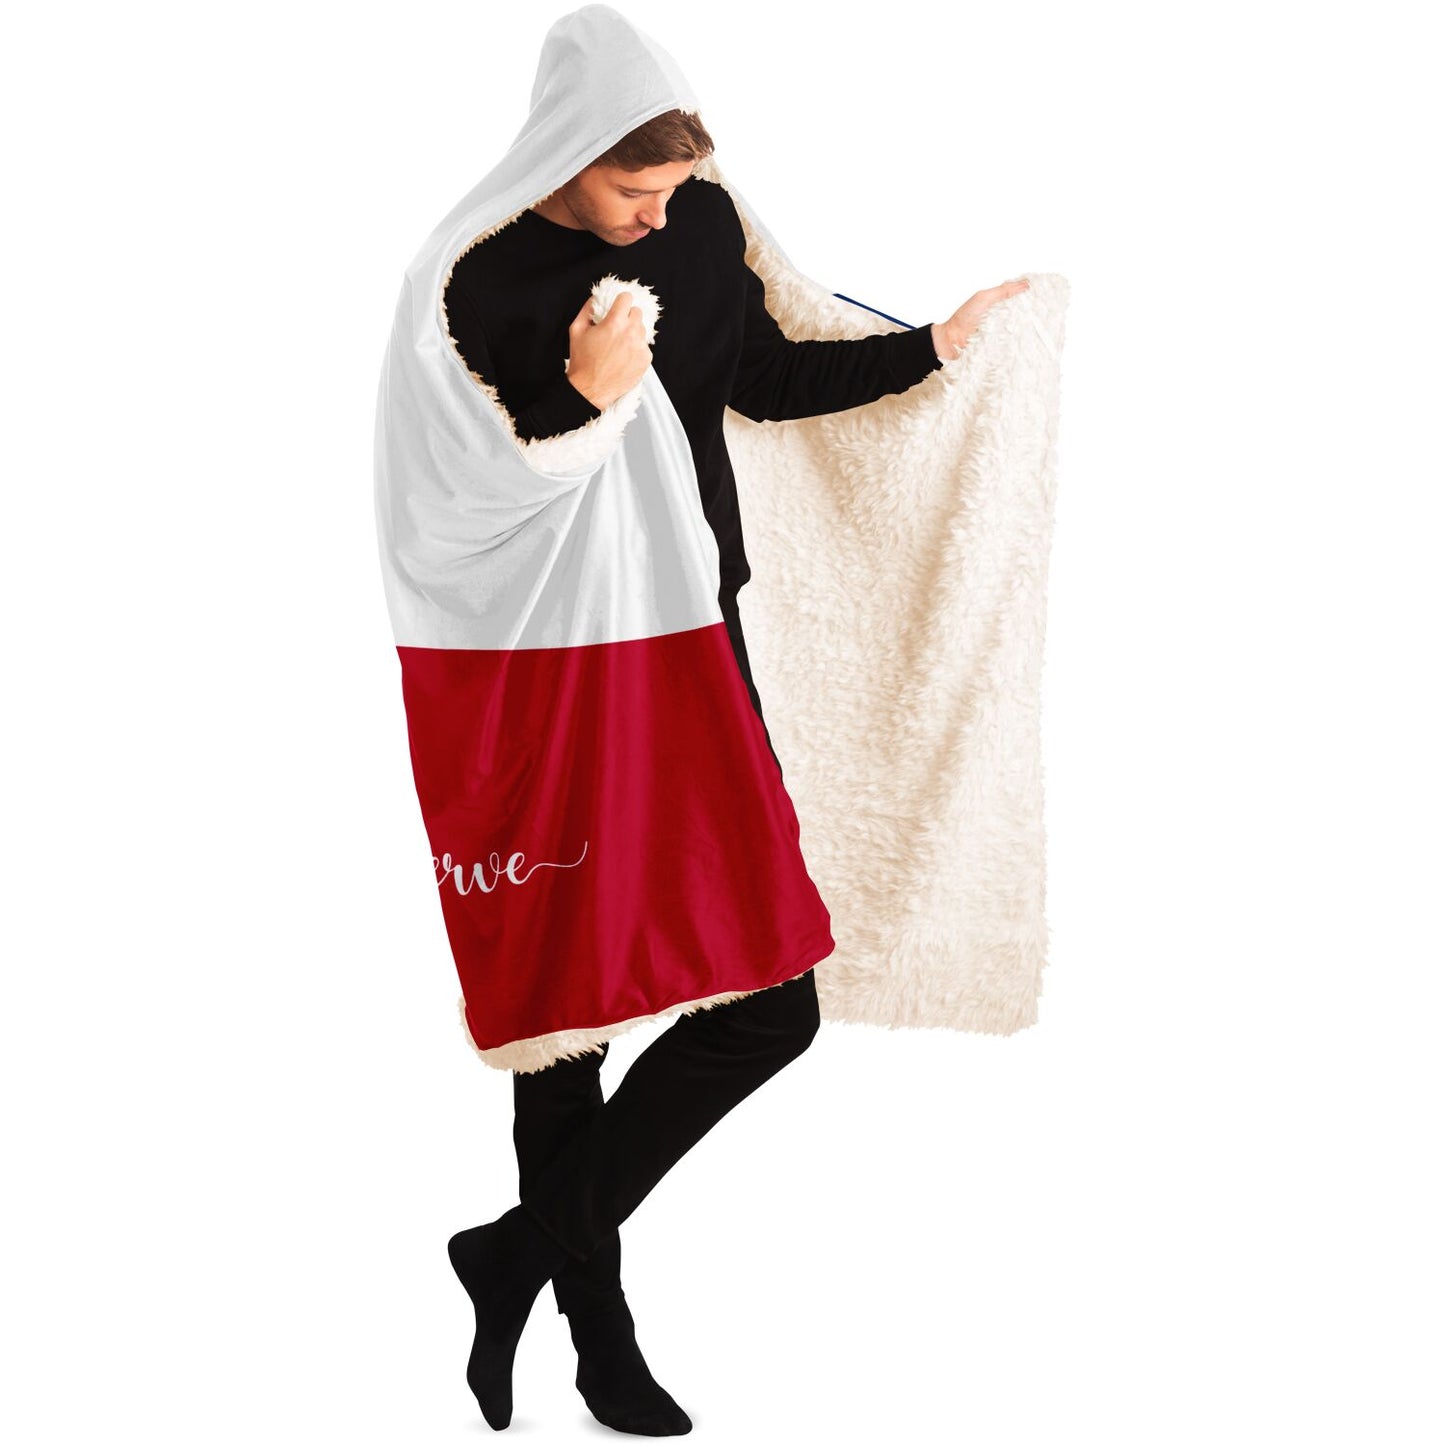 TEXAS Called to Serve Hooded Blanket